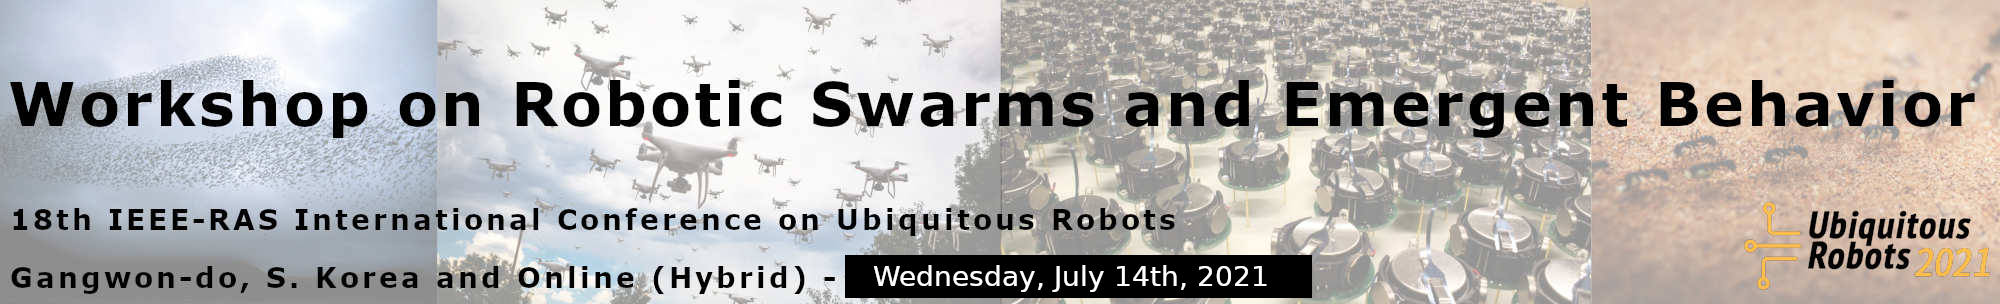 Workshop on Future Trust in Robotics, Autonomous Systems, and Artificial Intelligence